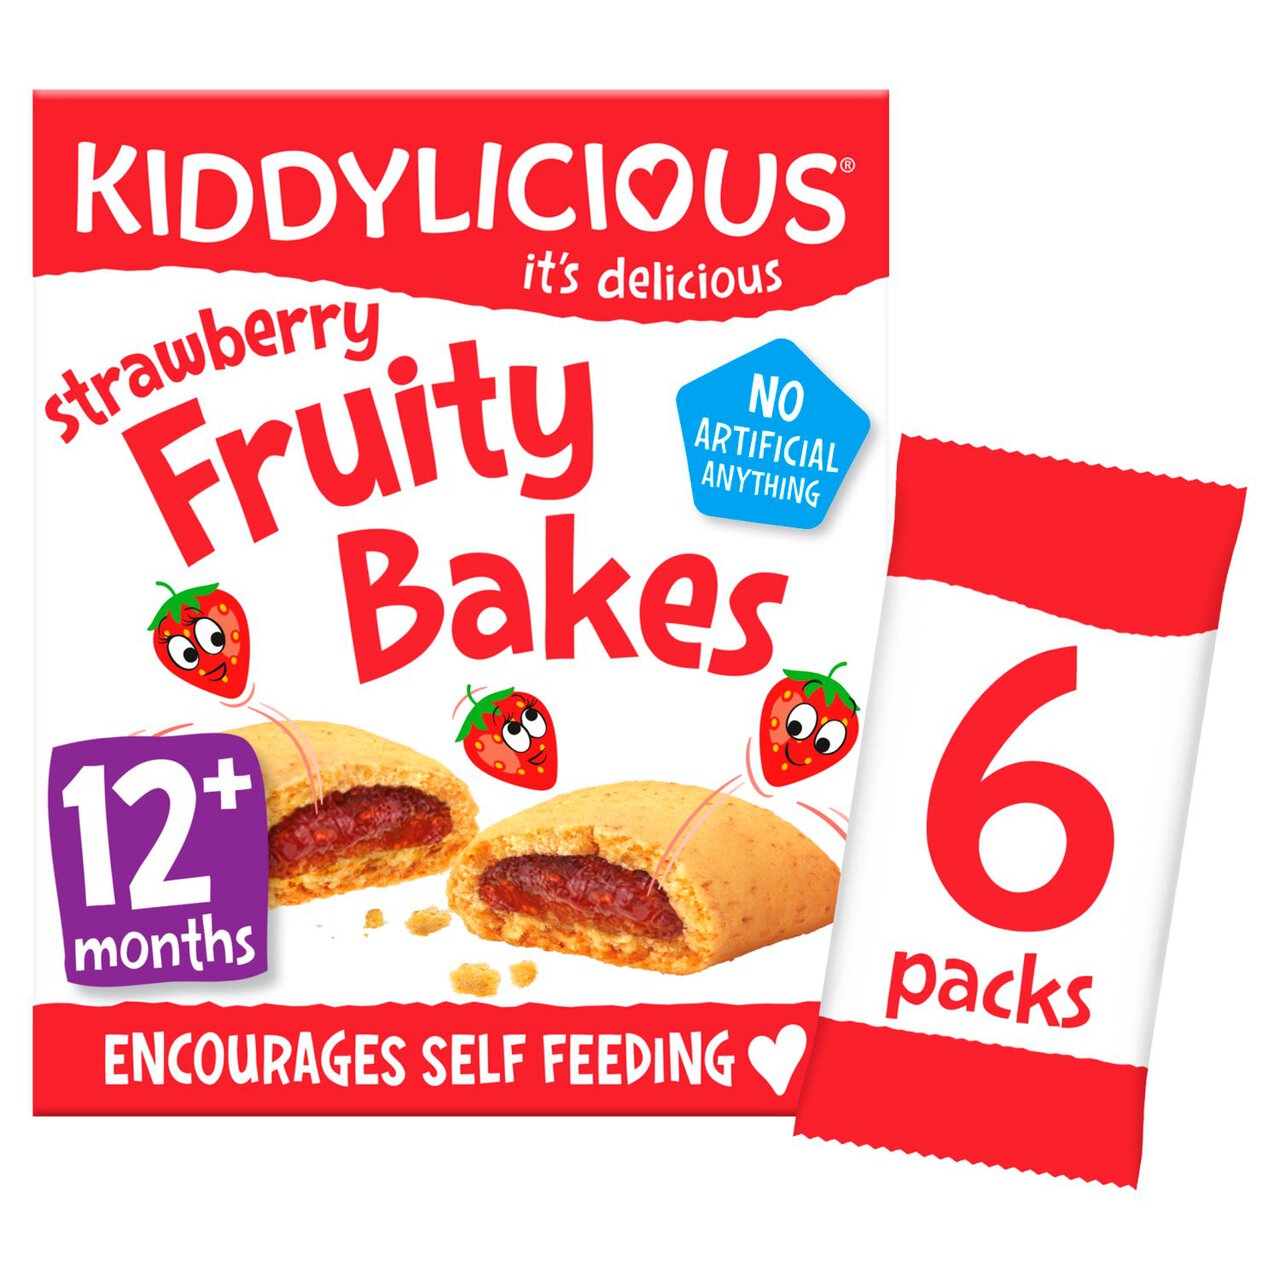 Kiddylicious Strawberry Fruity Bakes, 12 mths+ Multipack 6 x 22g